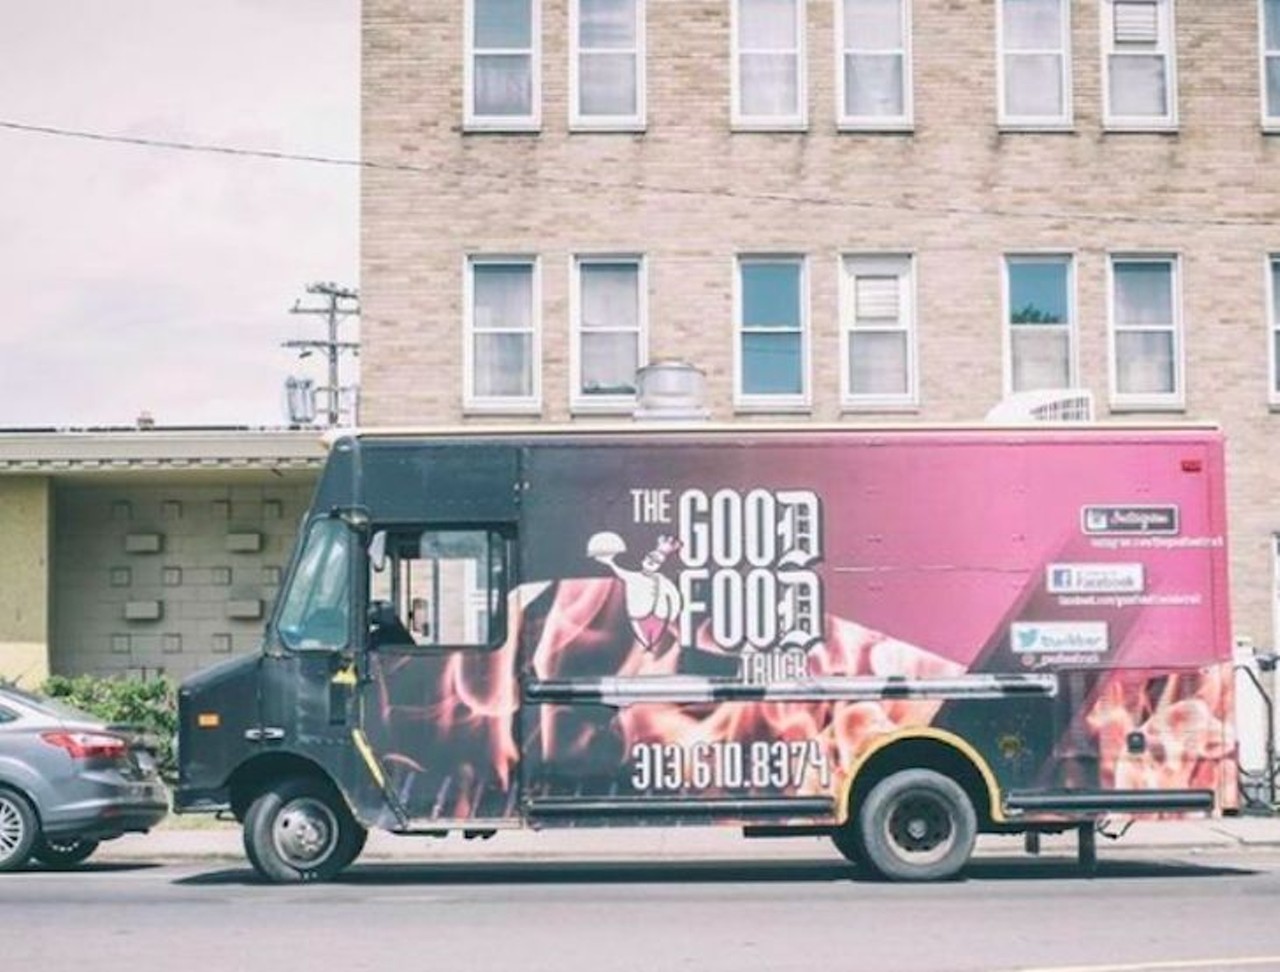 The Good Food Truck
instagram.com/thegoodfoodtruck
The Good Food Truck is aptly named. With a rotating menu of comforting foods like steak bites, hibachi fried rice and jerk chicken bites, The Good Food Truck dishes out food wins.
Photo via The Good Food Truck/Instagram 